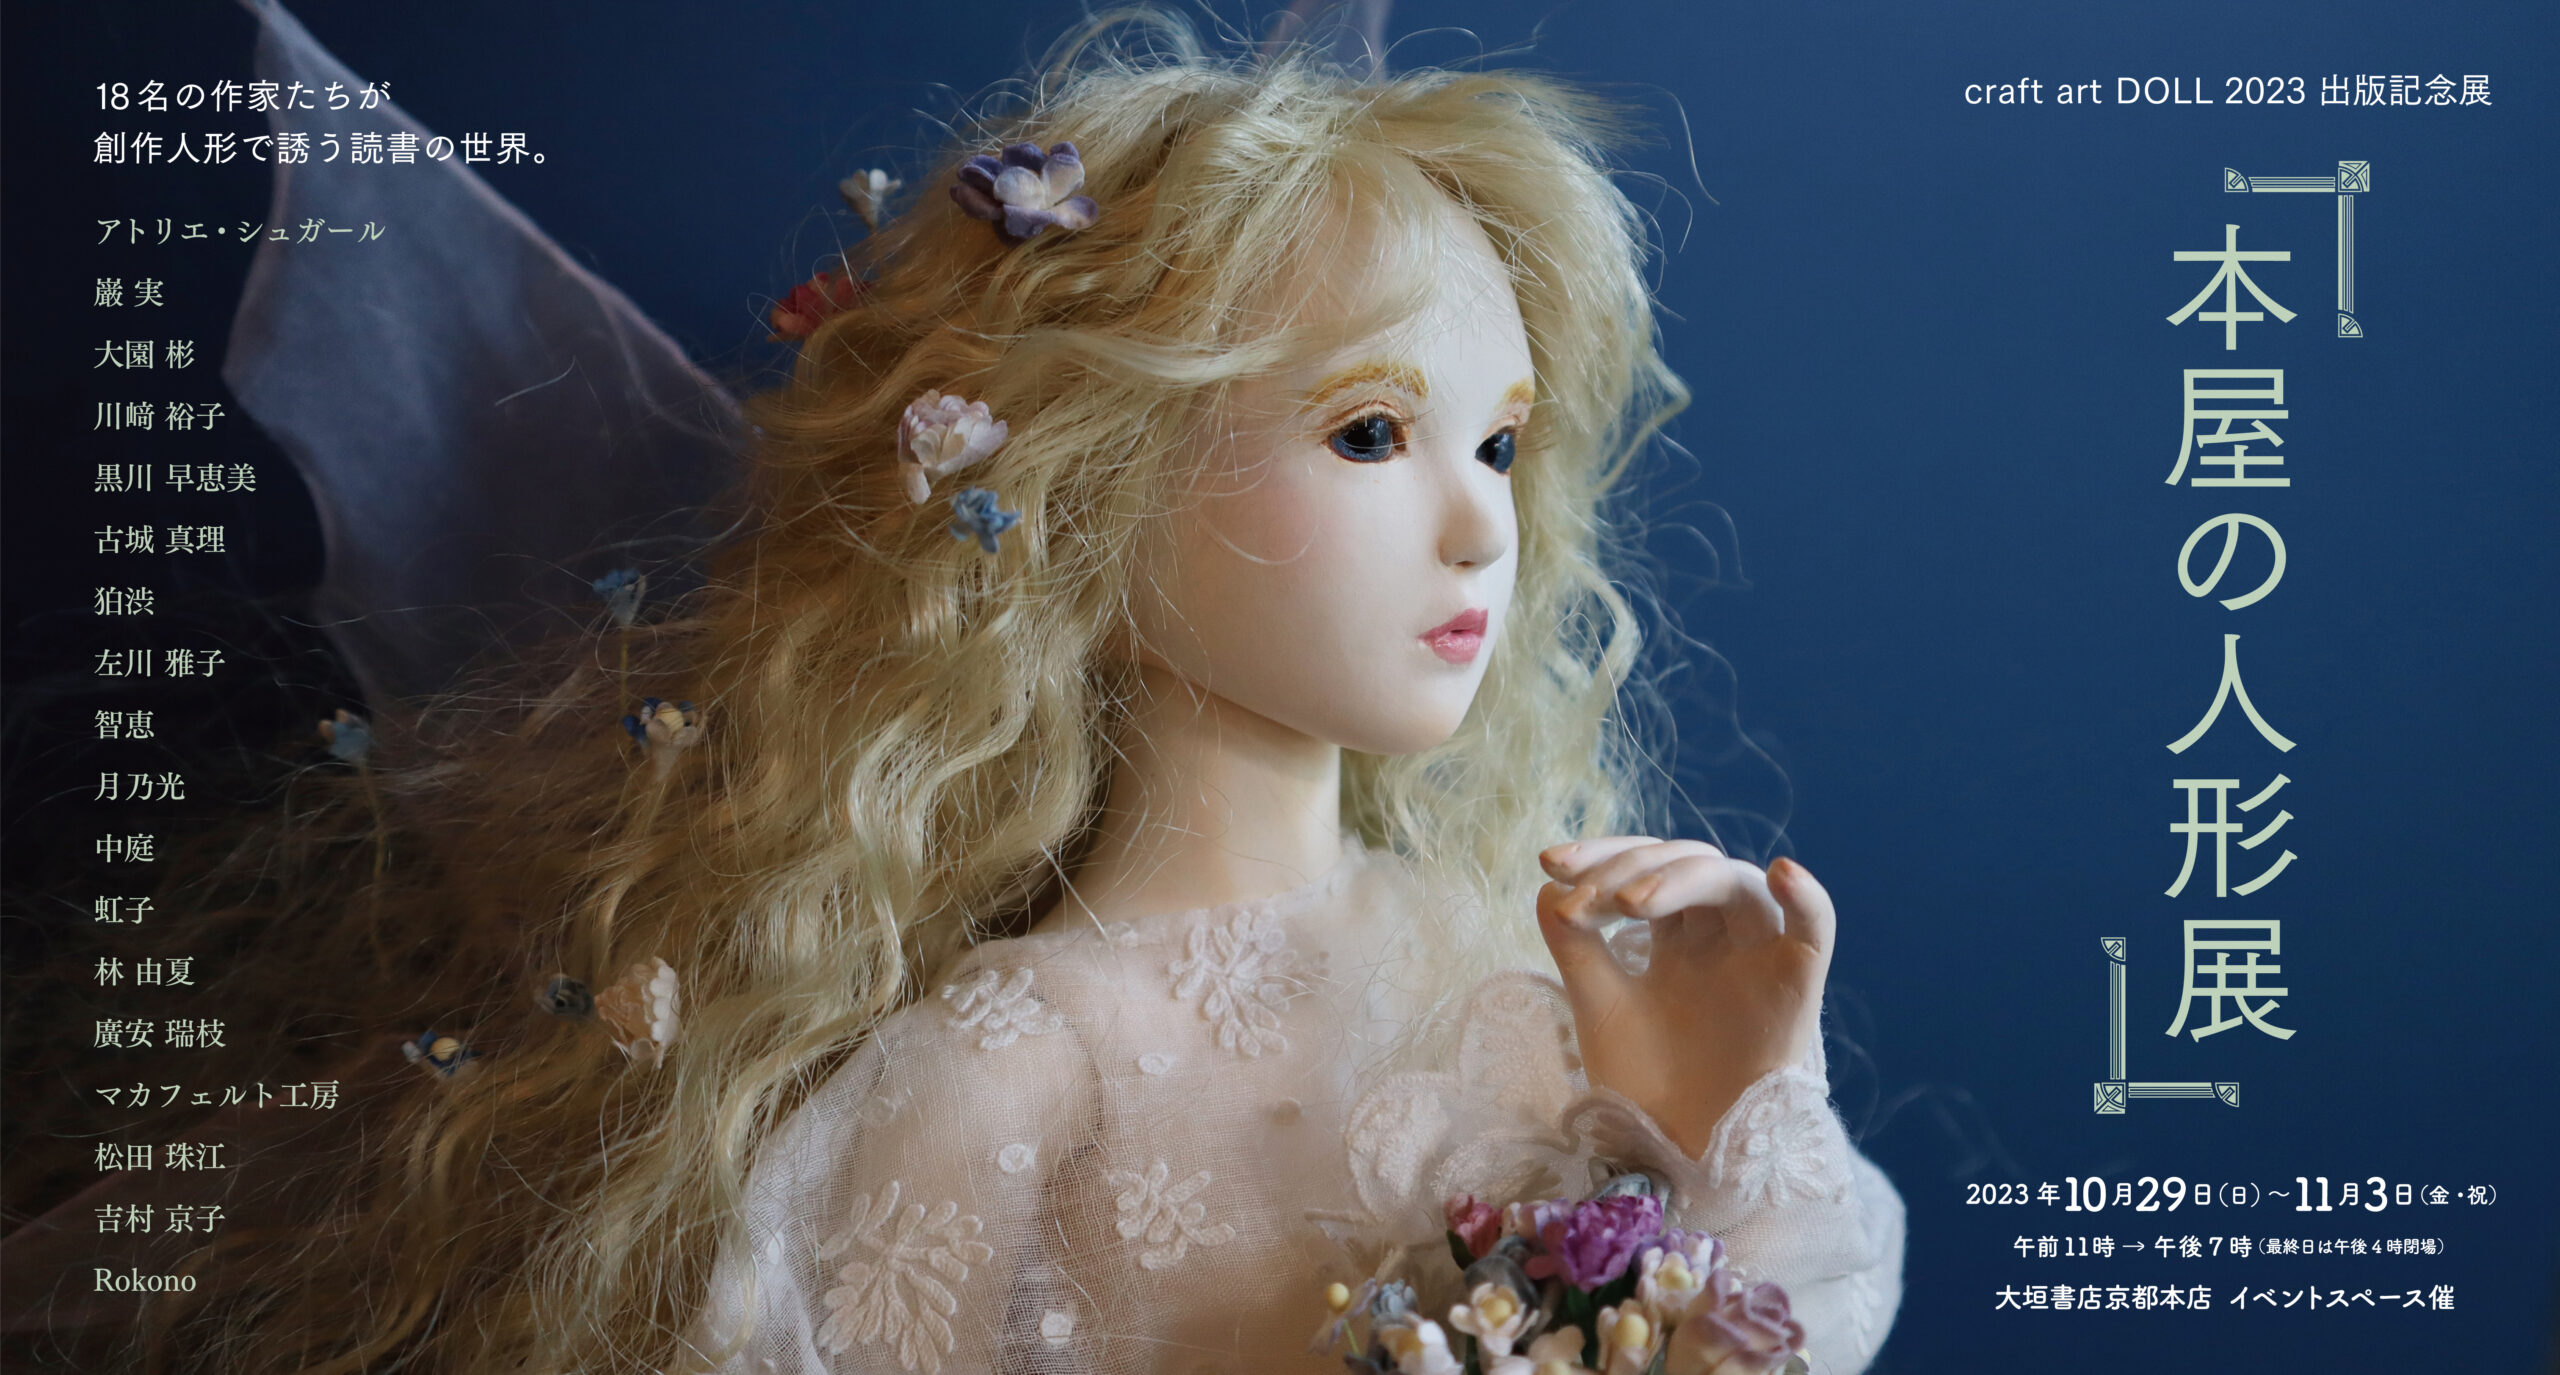 craft art DOLL SALON | for all DOLL-LOVERS